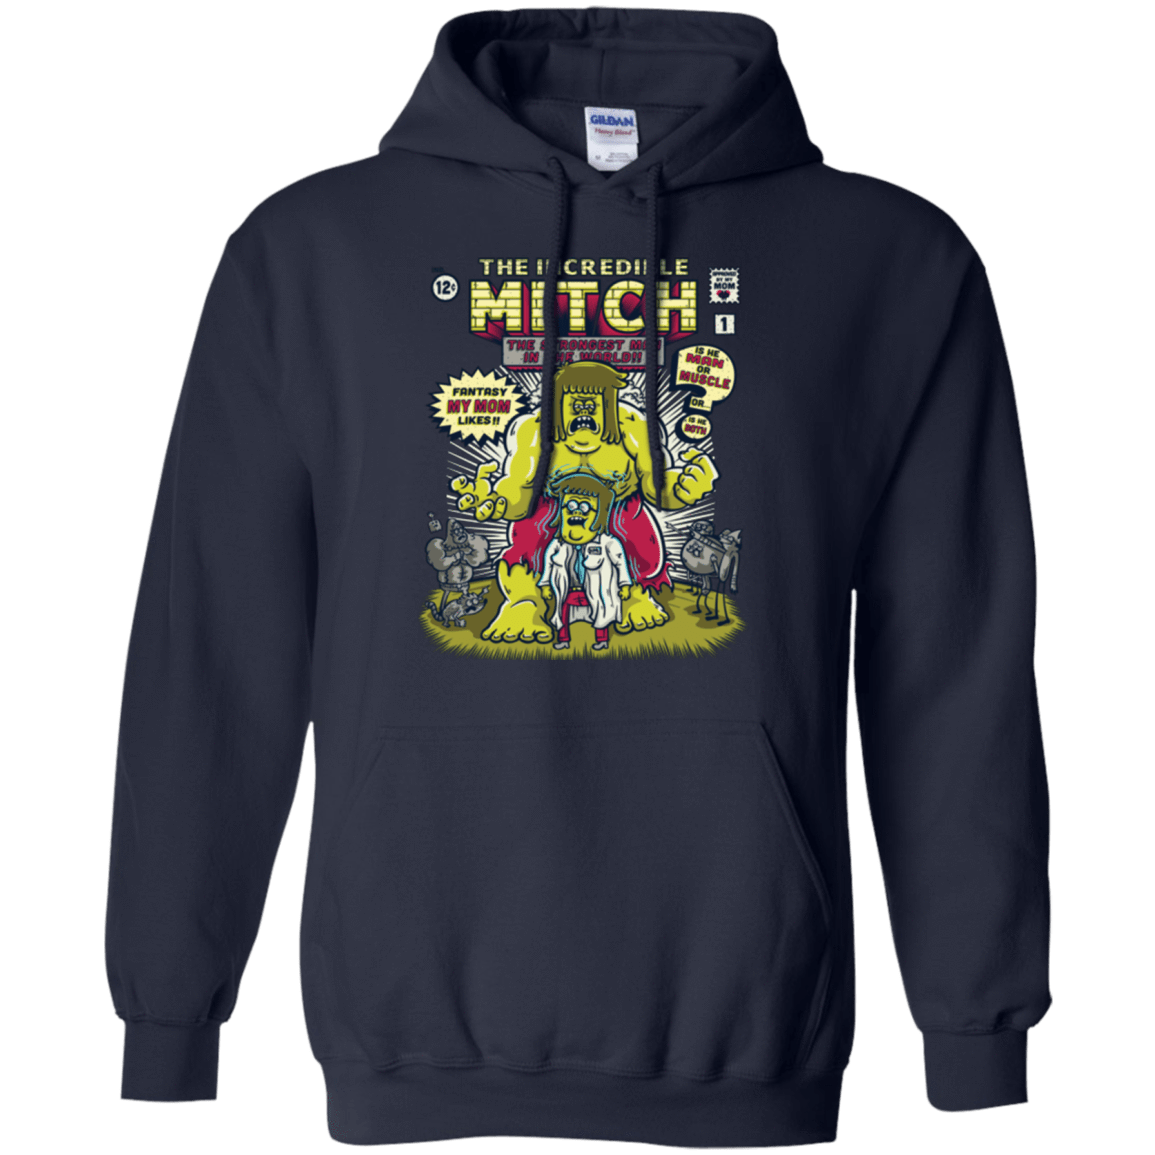 Sweatshirts Navy / Small Incredible Mitch Pullover Hoodie